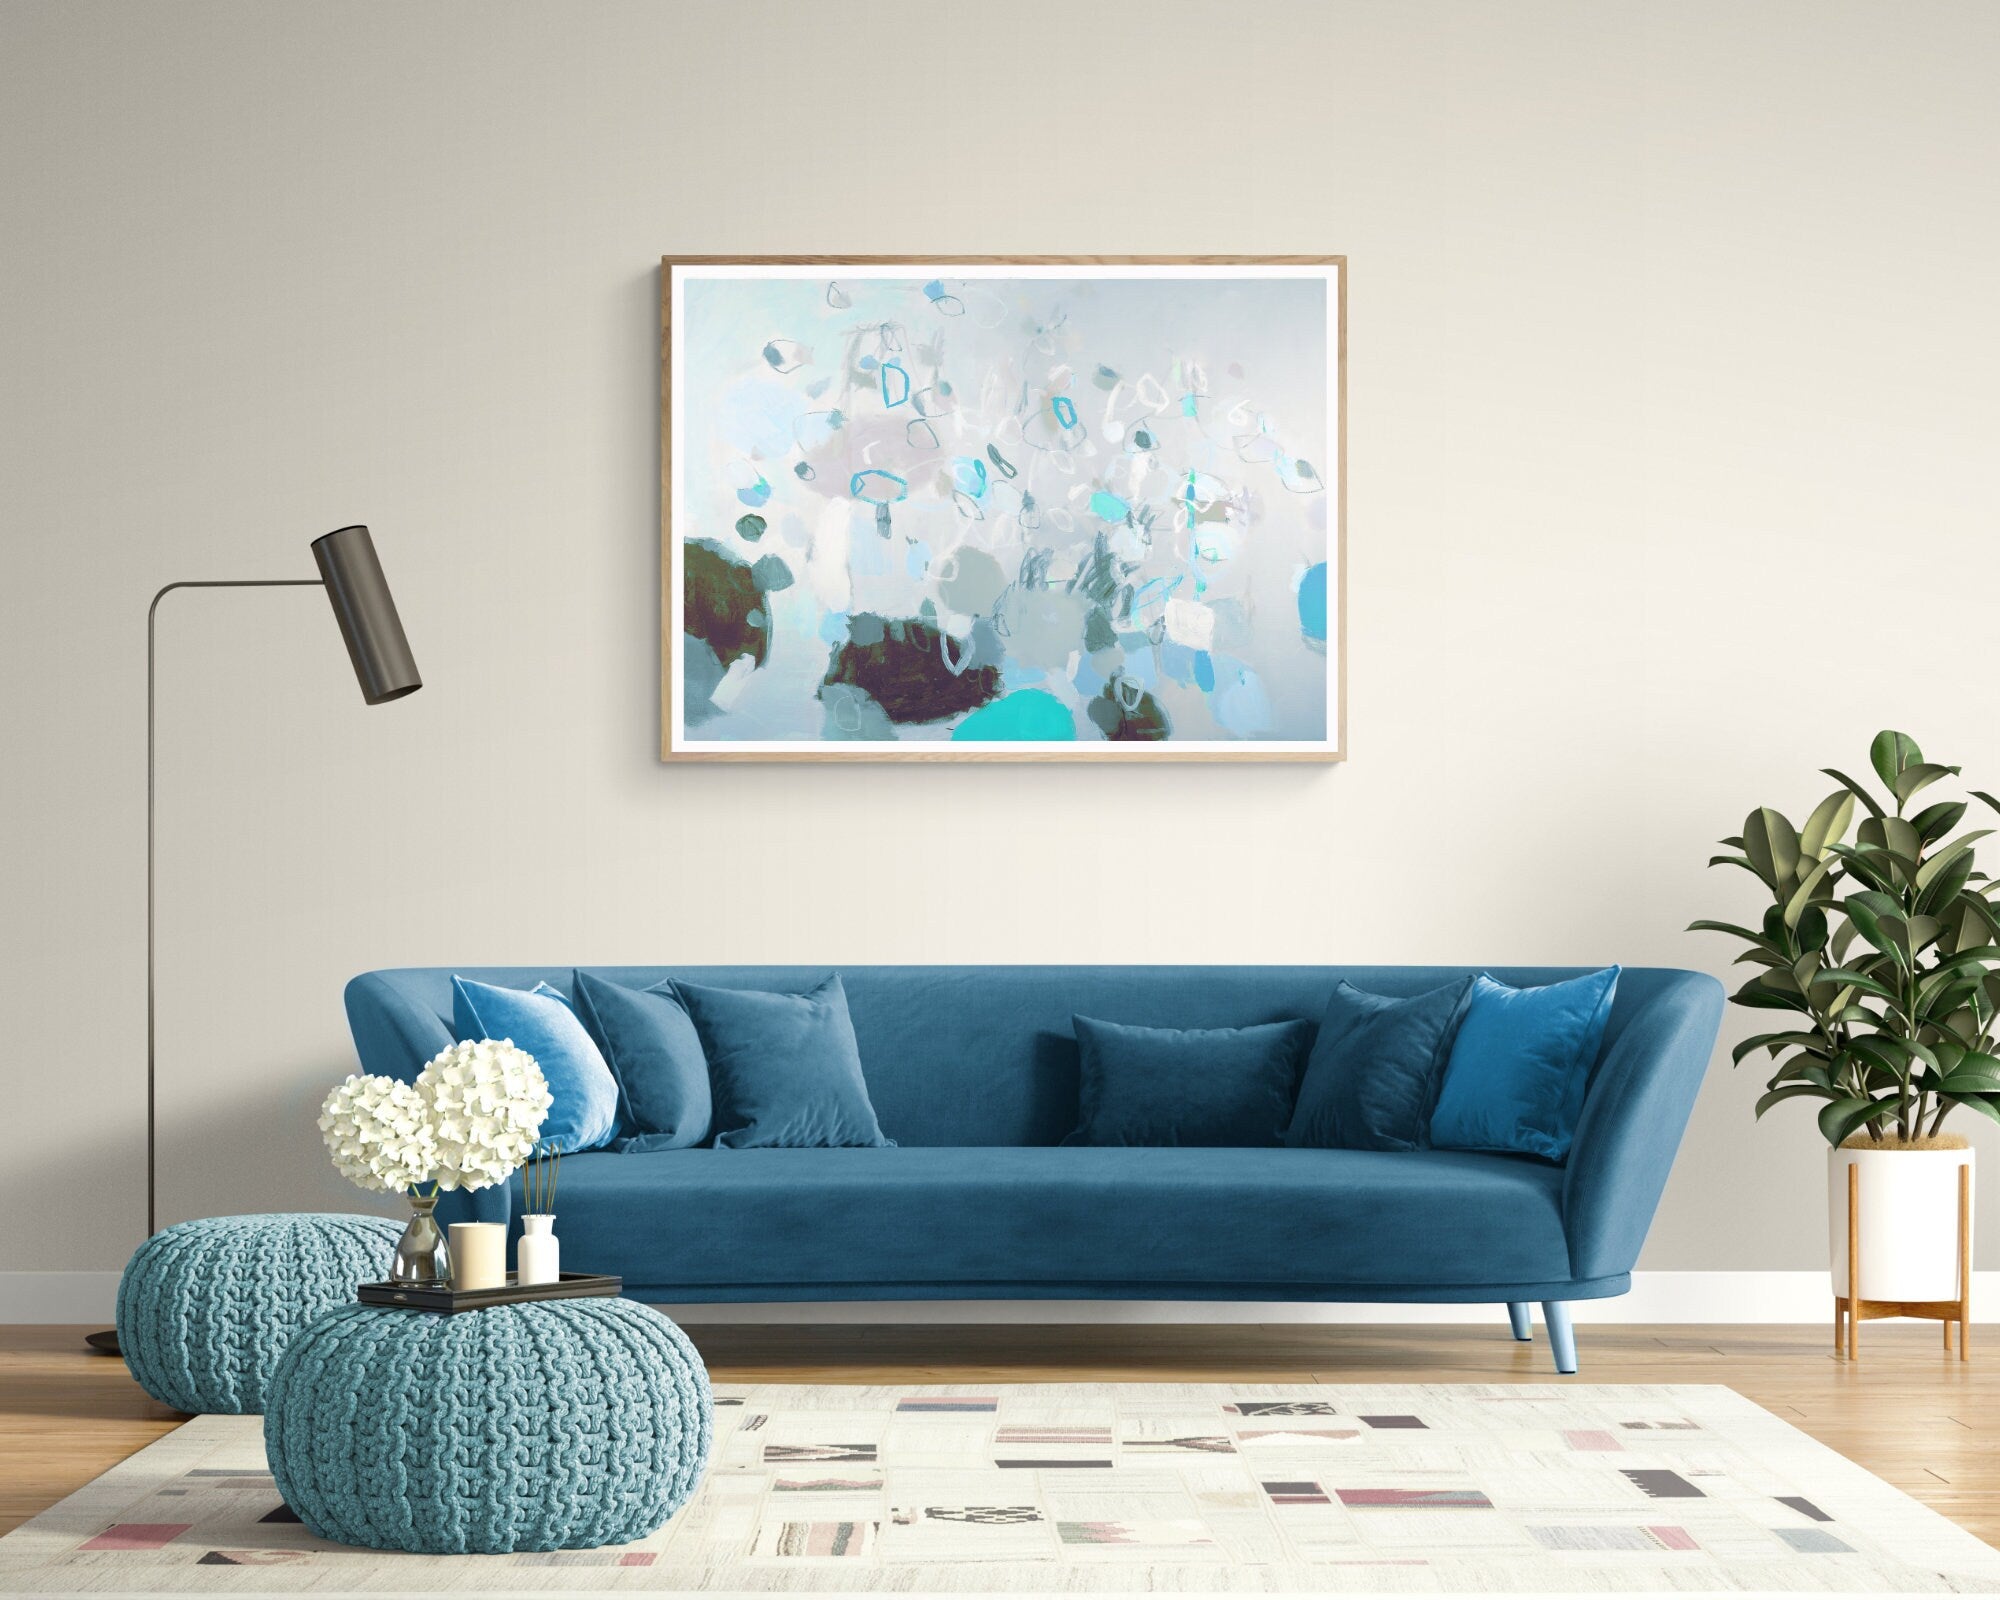 Teal aqua creative decoration Large Abstract Painting, Large Modern wall art, 24x36, 16x20 by Camilo Mattis